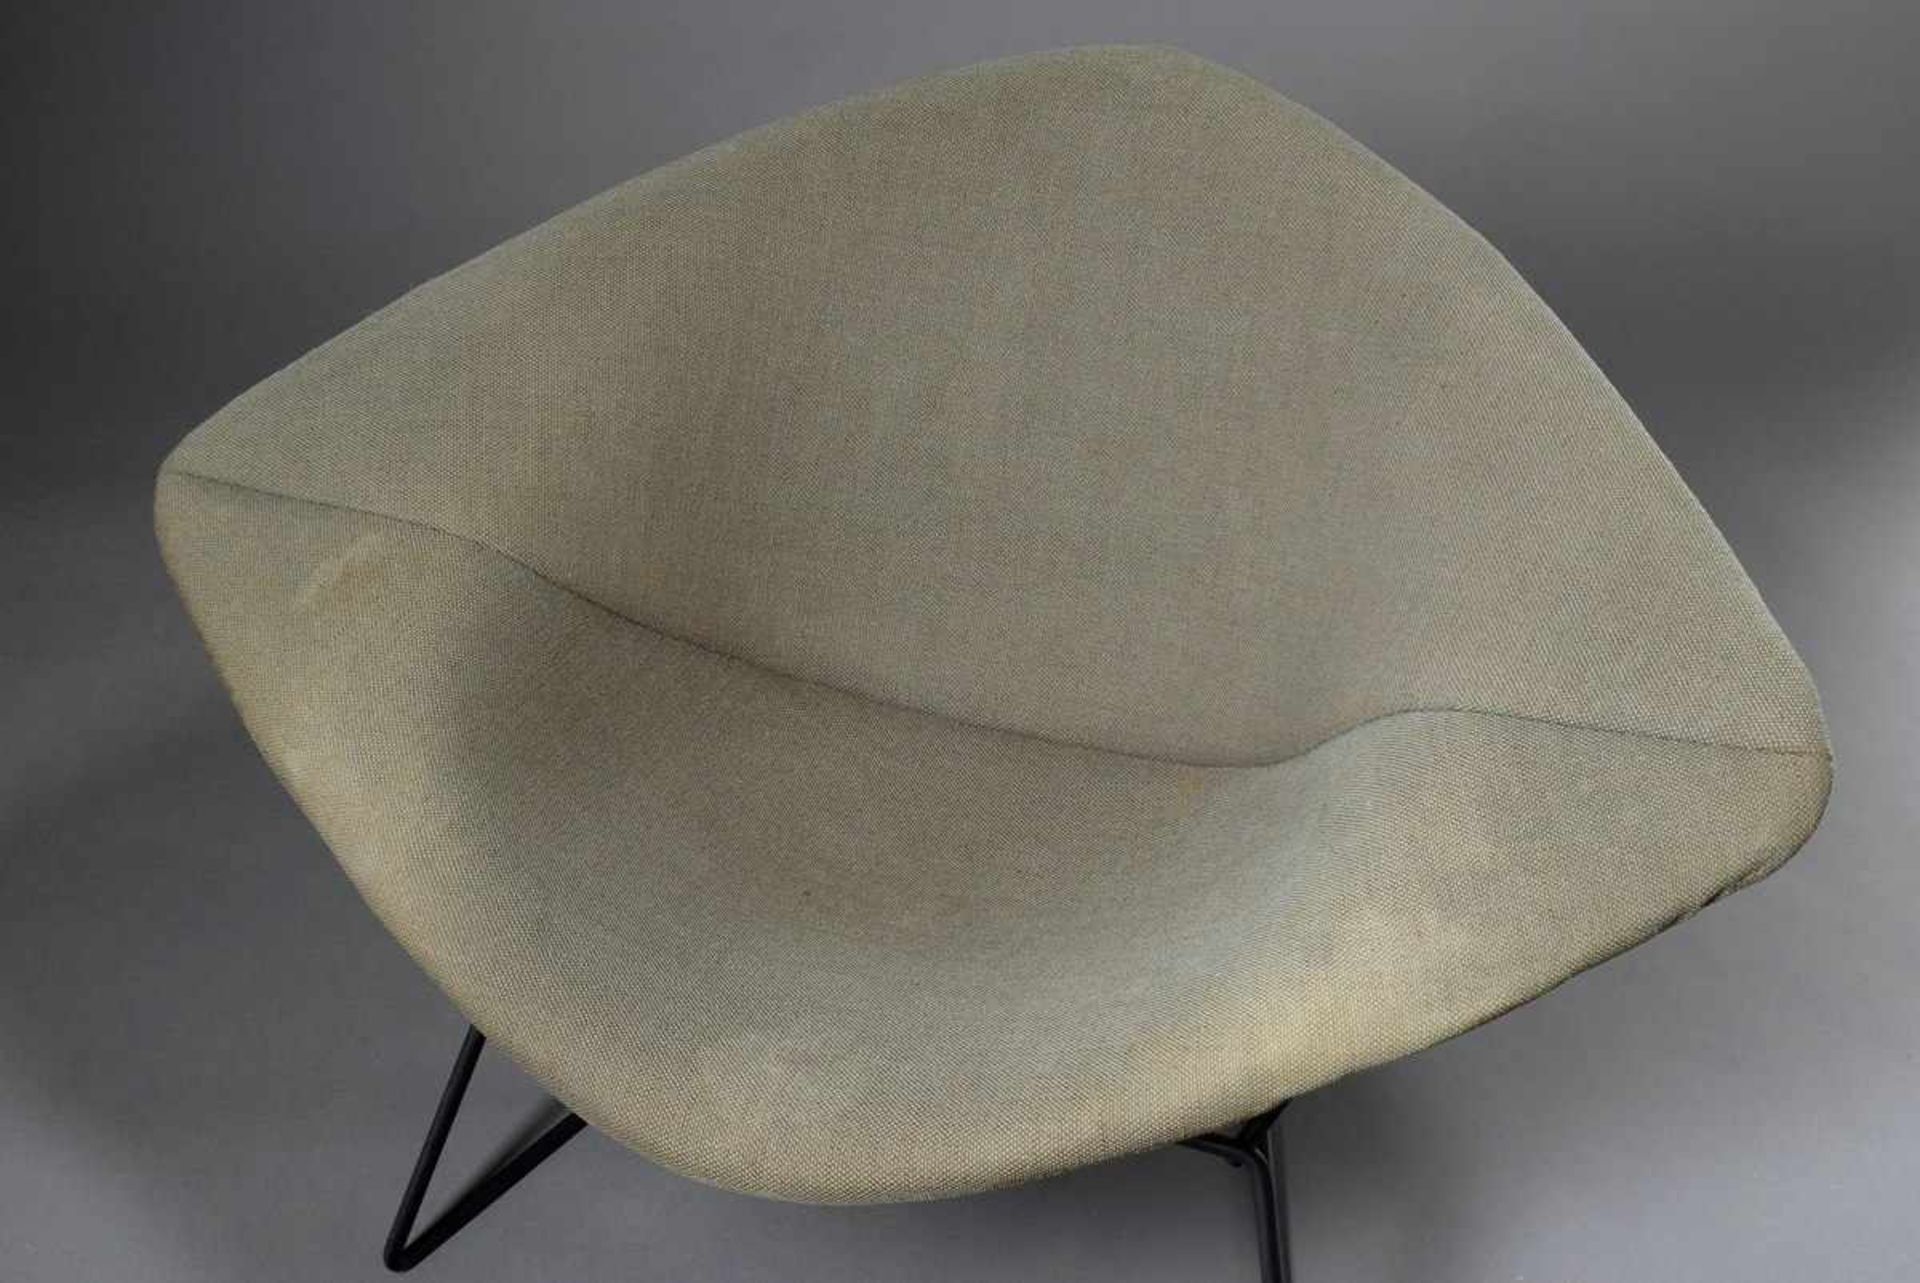 Diamond Chair with grey fabric cover, designed by Harry Bertoia, 35/68x110cm, slightly - Image 3 of 7